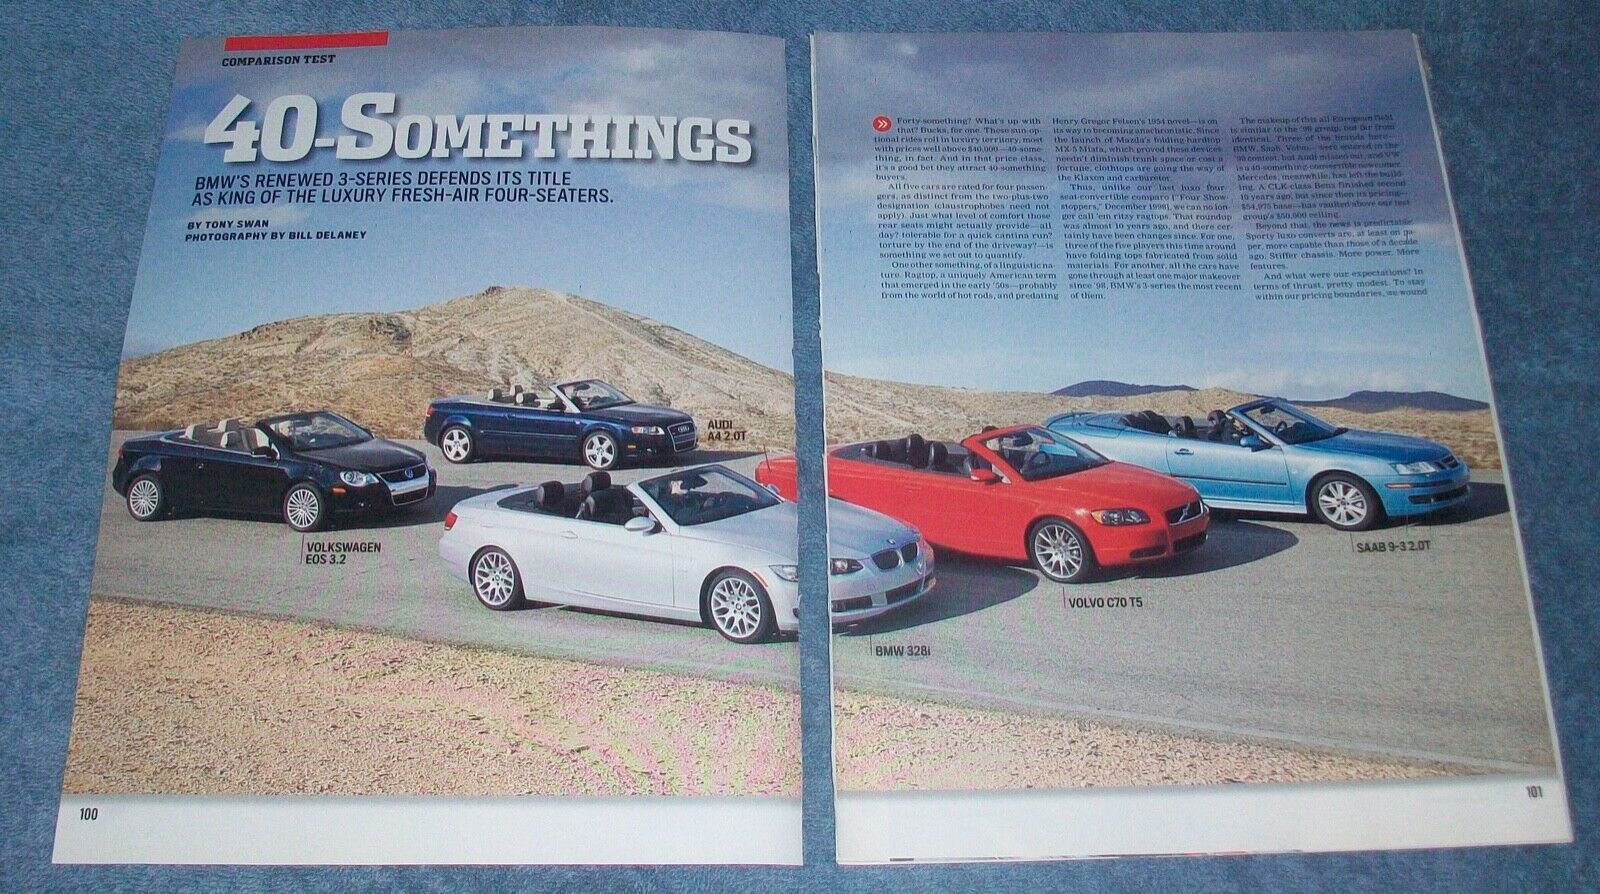 2007 VW EOS 3.2 vs.Audi A4 2.0T vs. BMW 328i vs. Volvo C70 T5 vs. Saab Article